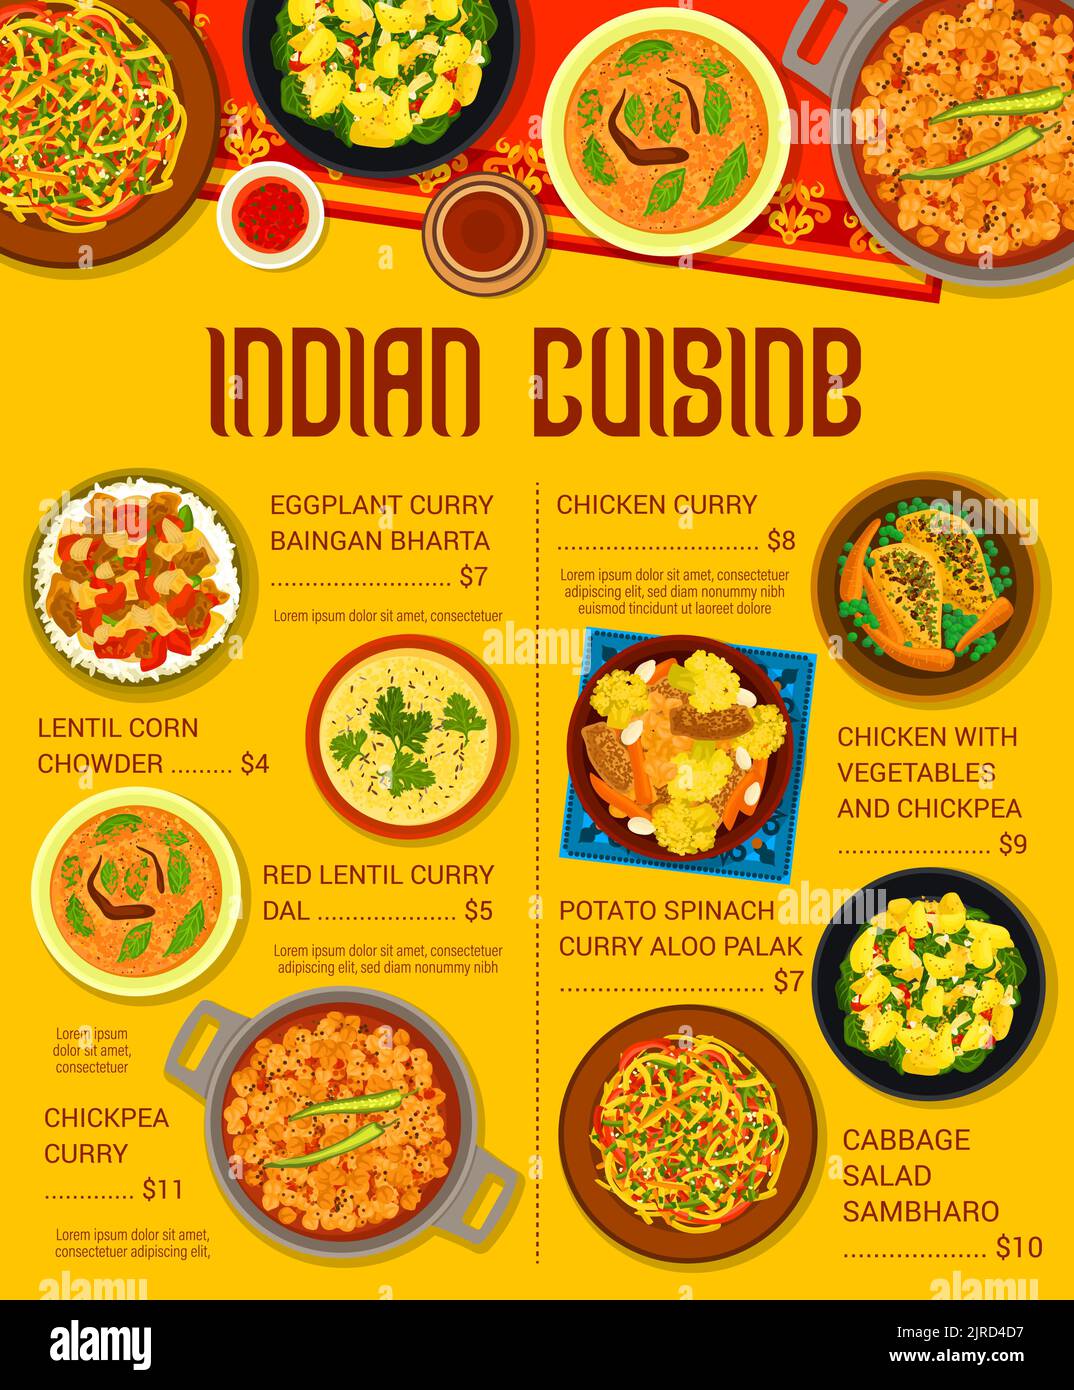 Indian cuisine meals menu page template. Chickpea, chicken and Aloo Palak curry, Cabbage salad Sambharo, corn chowder and chicken with vegetables and chickpea, Dal and eggplant Baingan Bharta curry Stock Vector